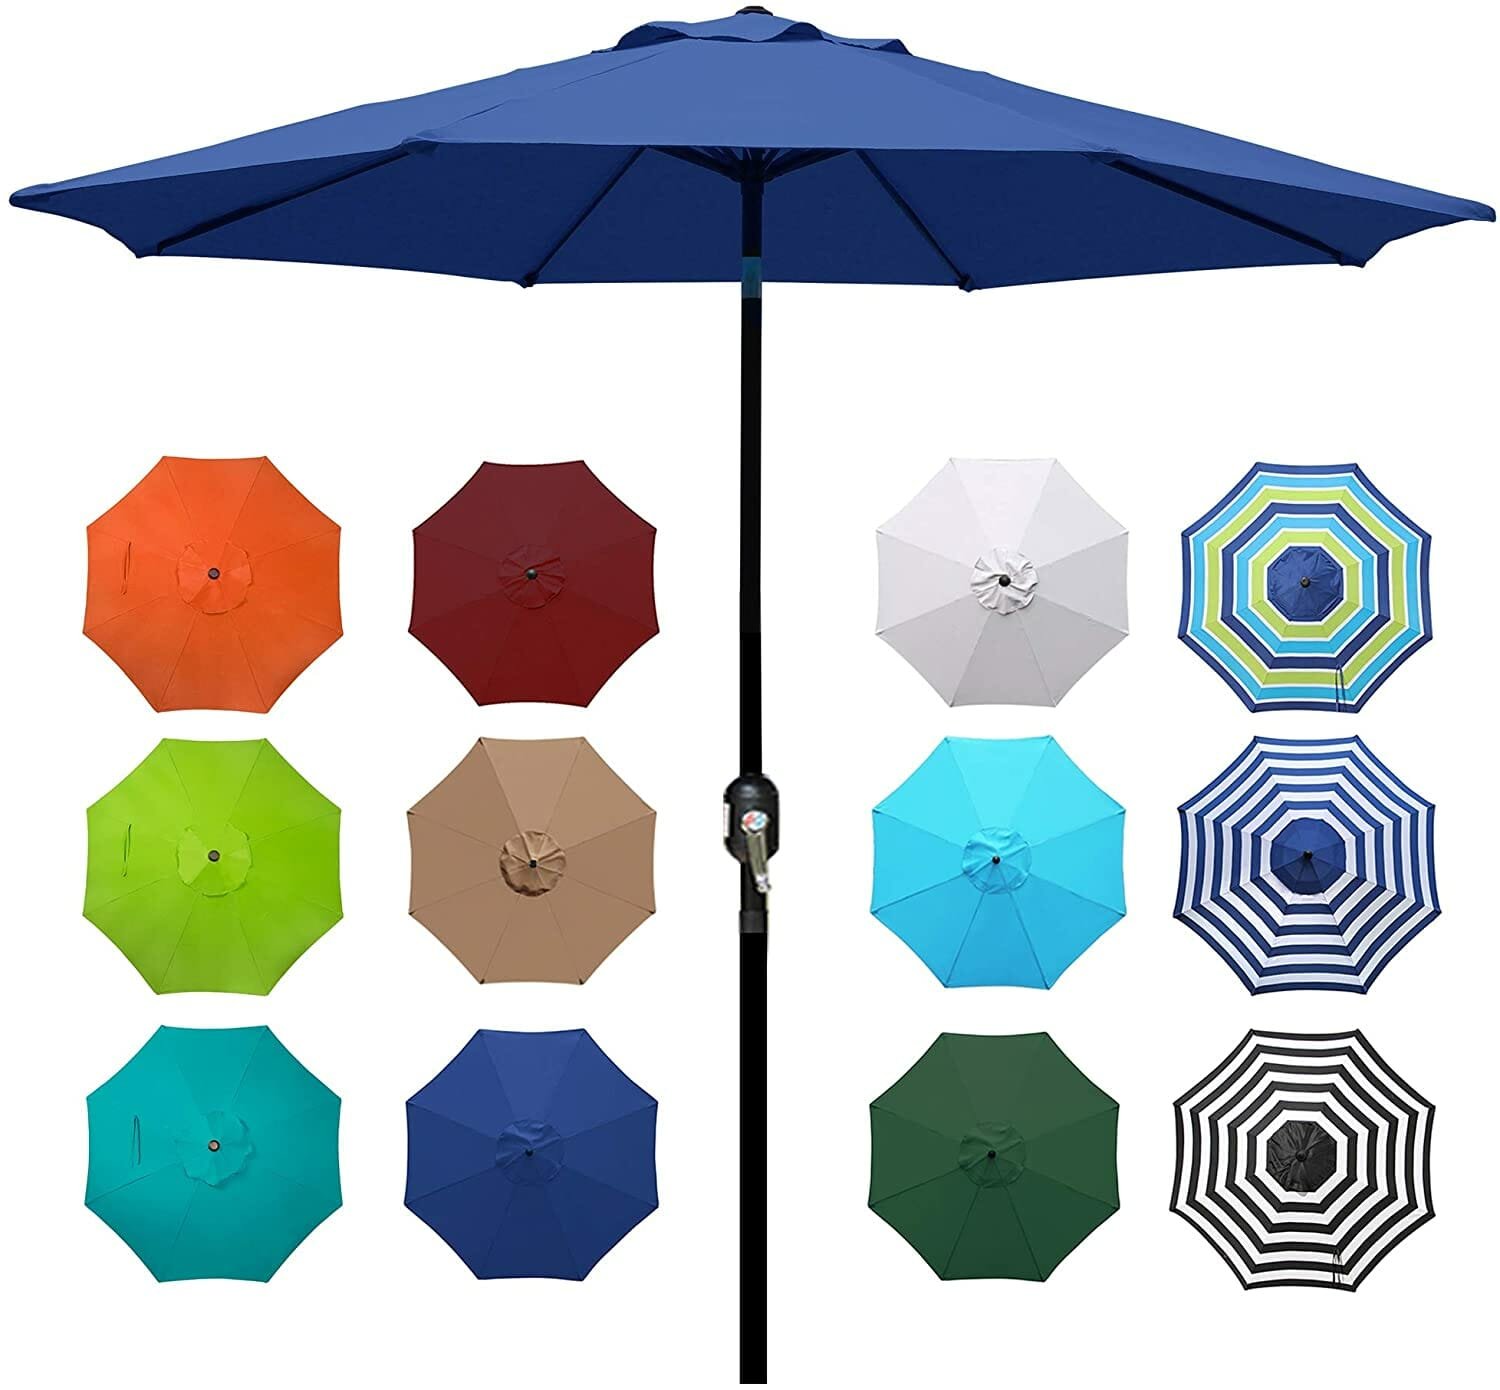 Patio umbrellas with various different possible colors